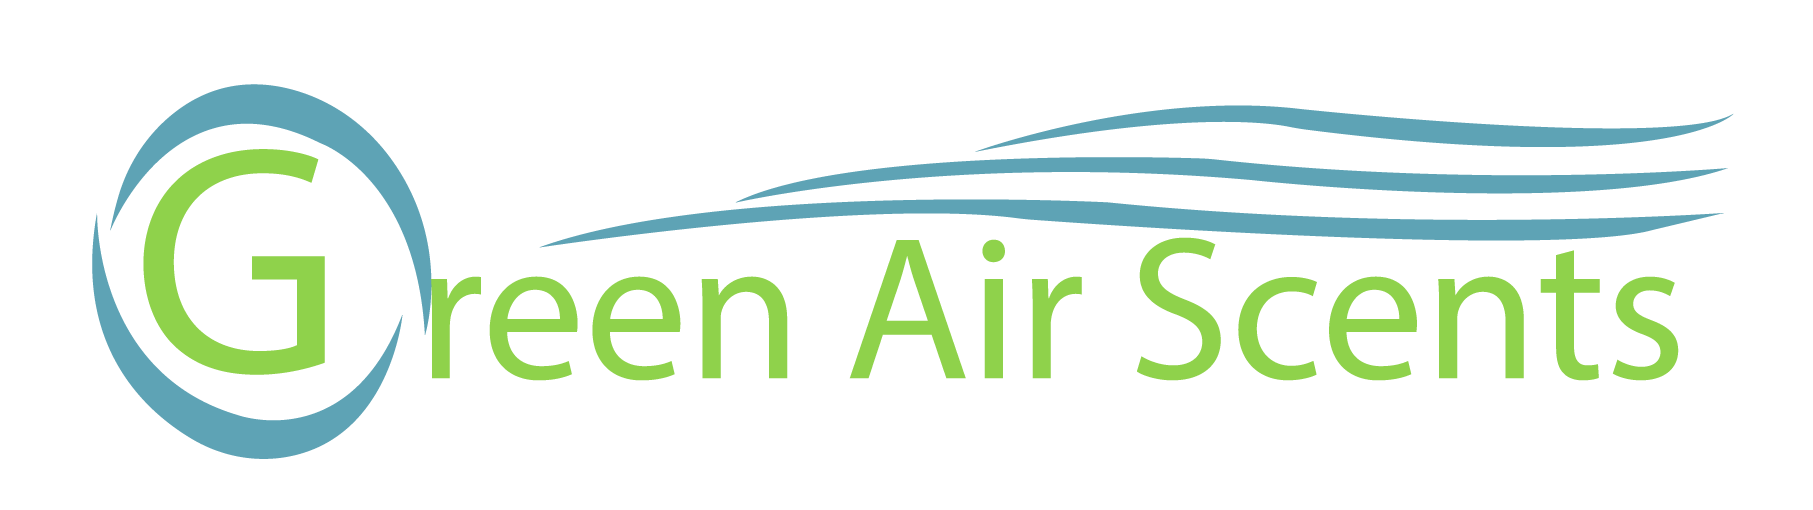 Green Air Scents